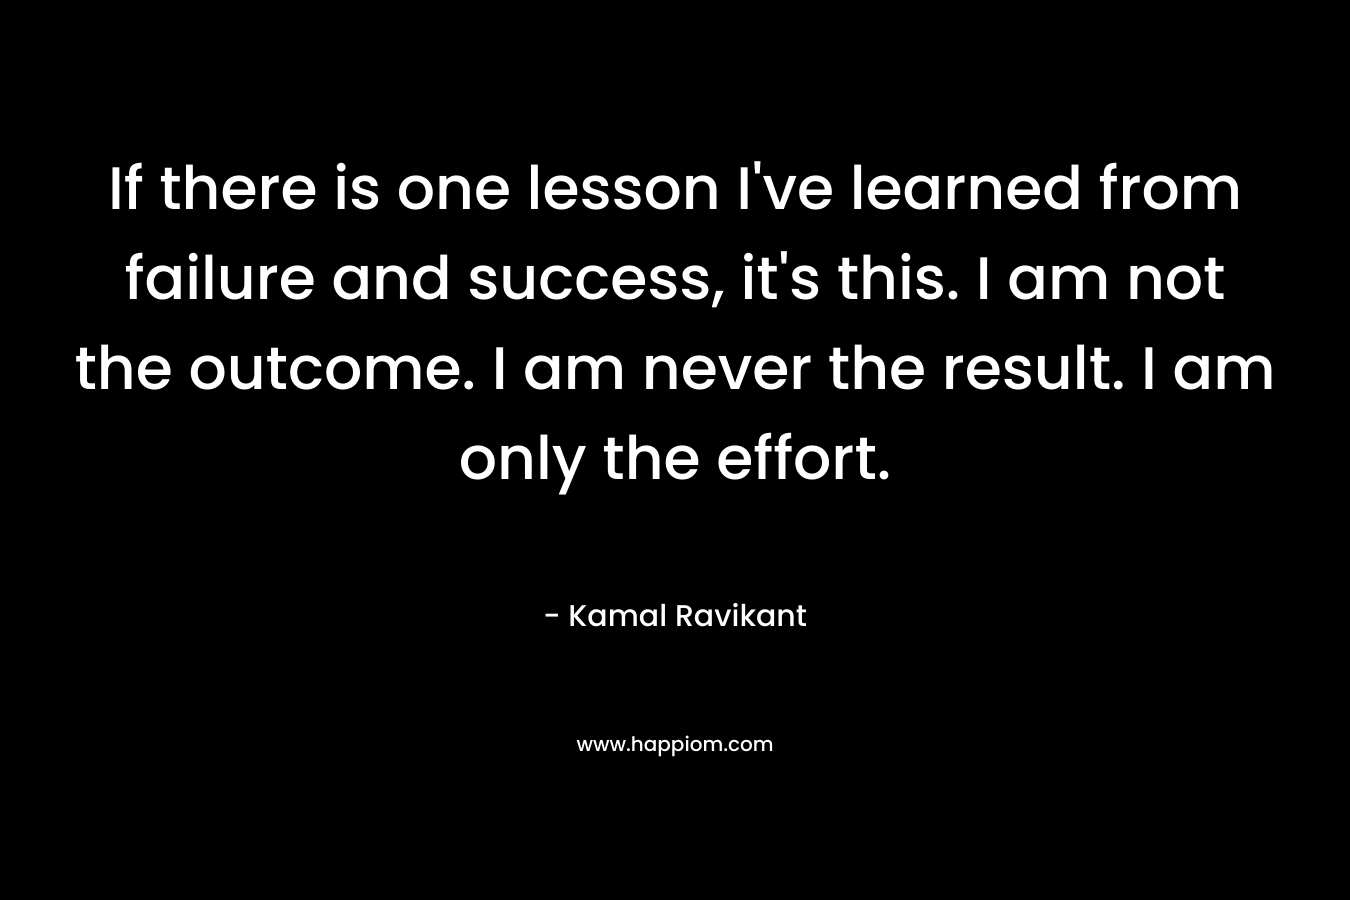 If there is one lesson I've learned from failure and success, it's this. I am not the outcome. I am never the result. I am only the effort.